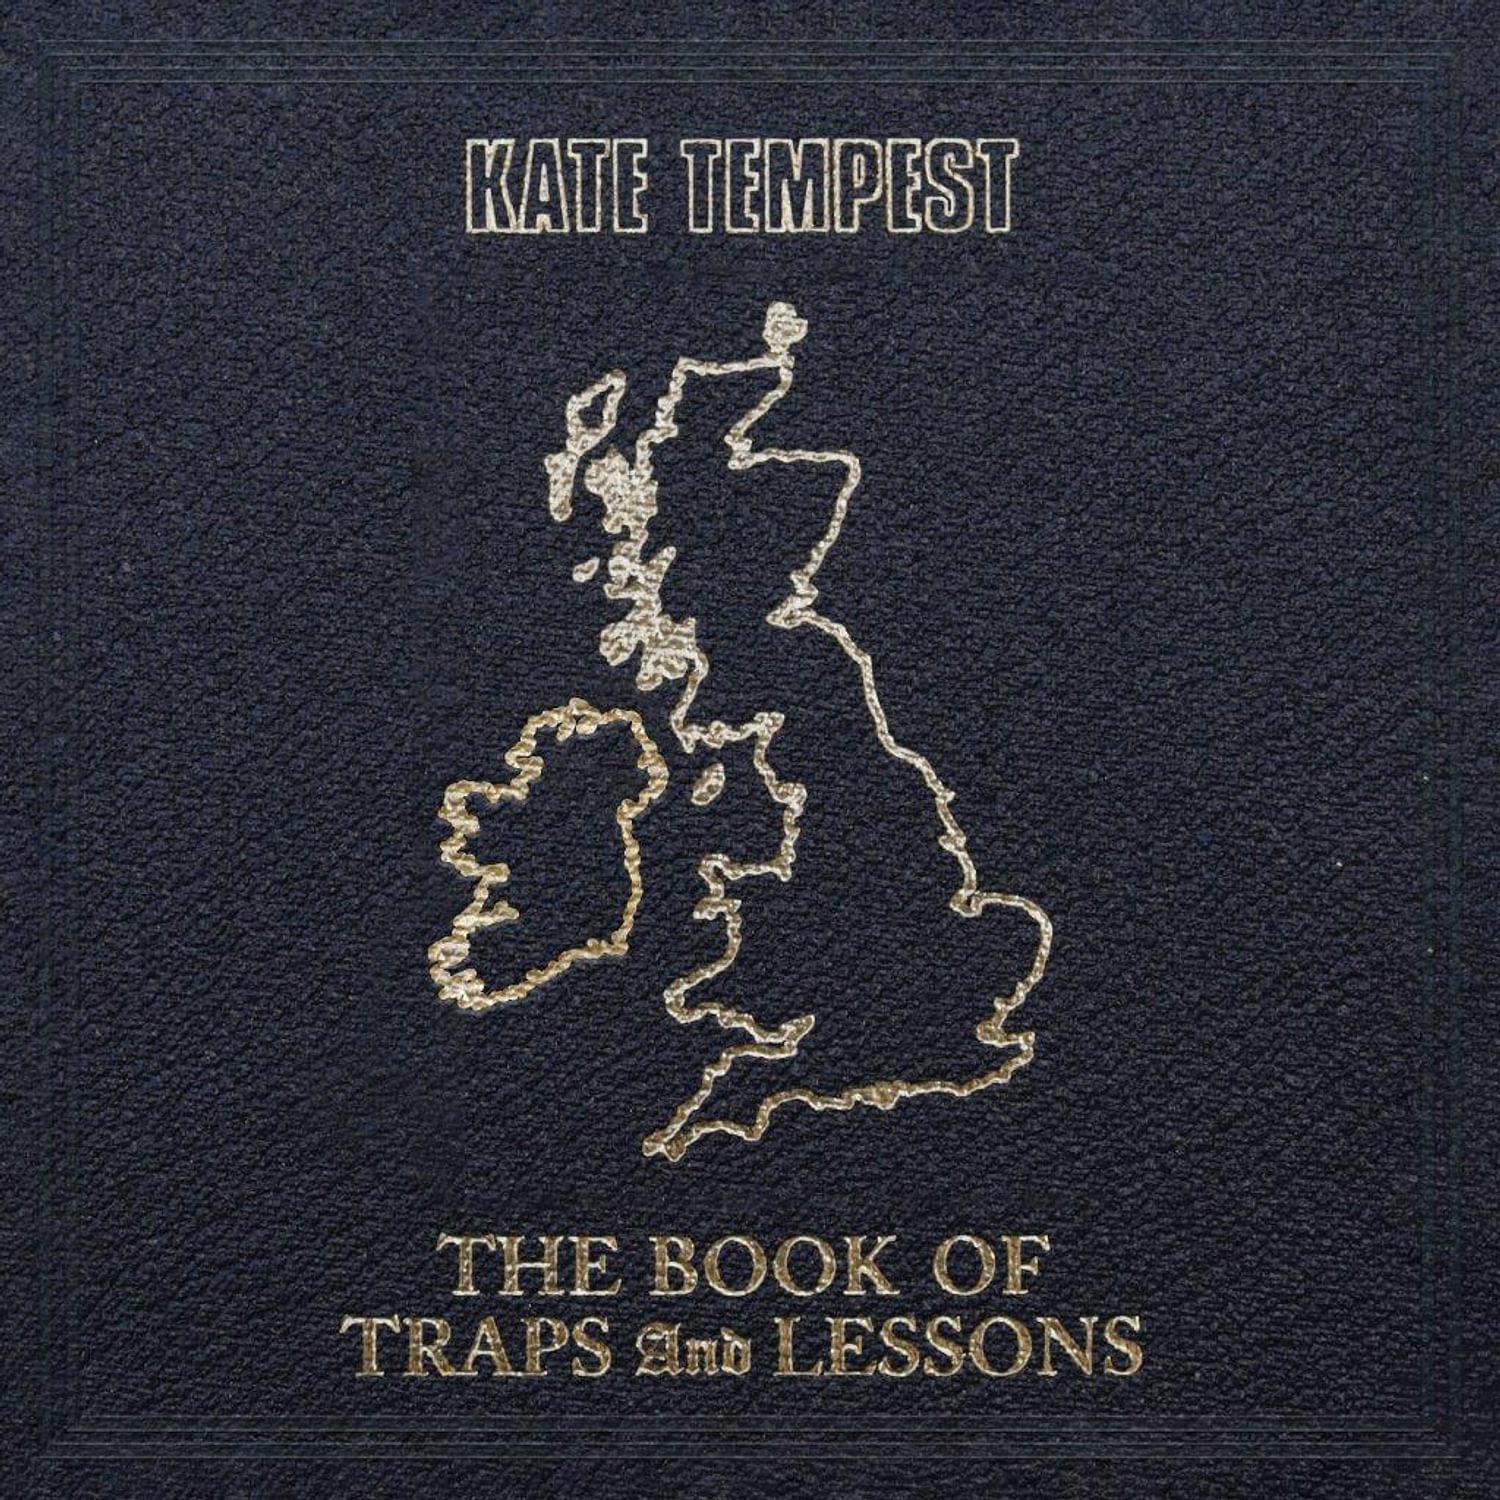 Kate Tempest - The Book of Traps and Lessons